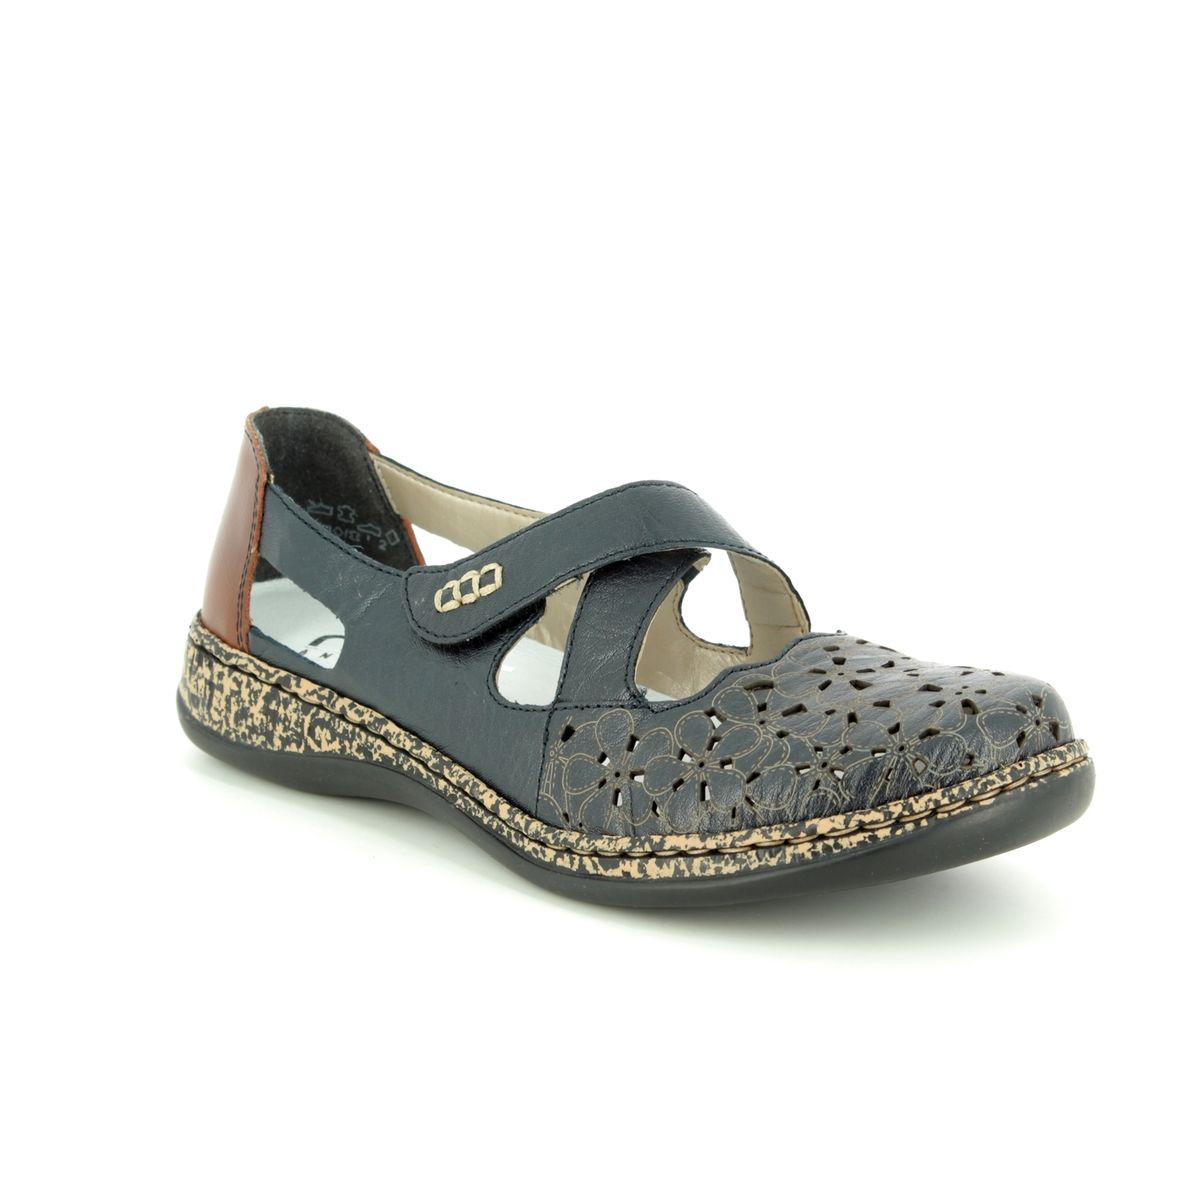 Rieker 463H4-14 Navy-tan Mary Jane Shoes